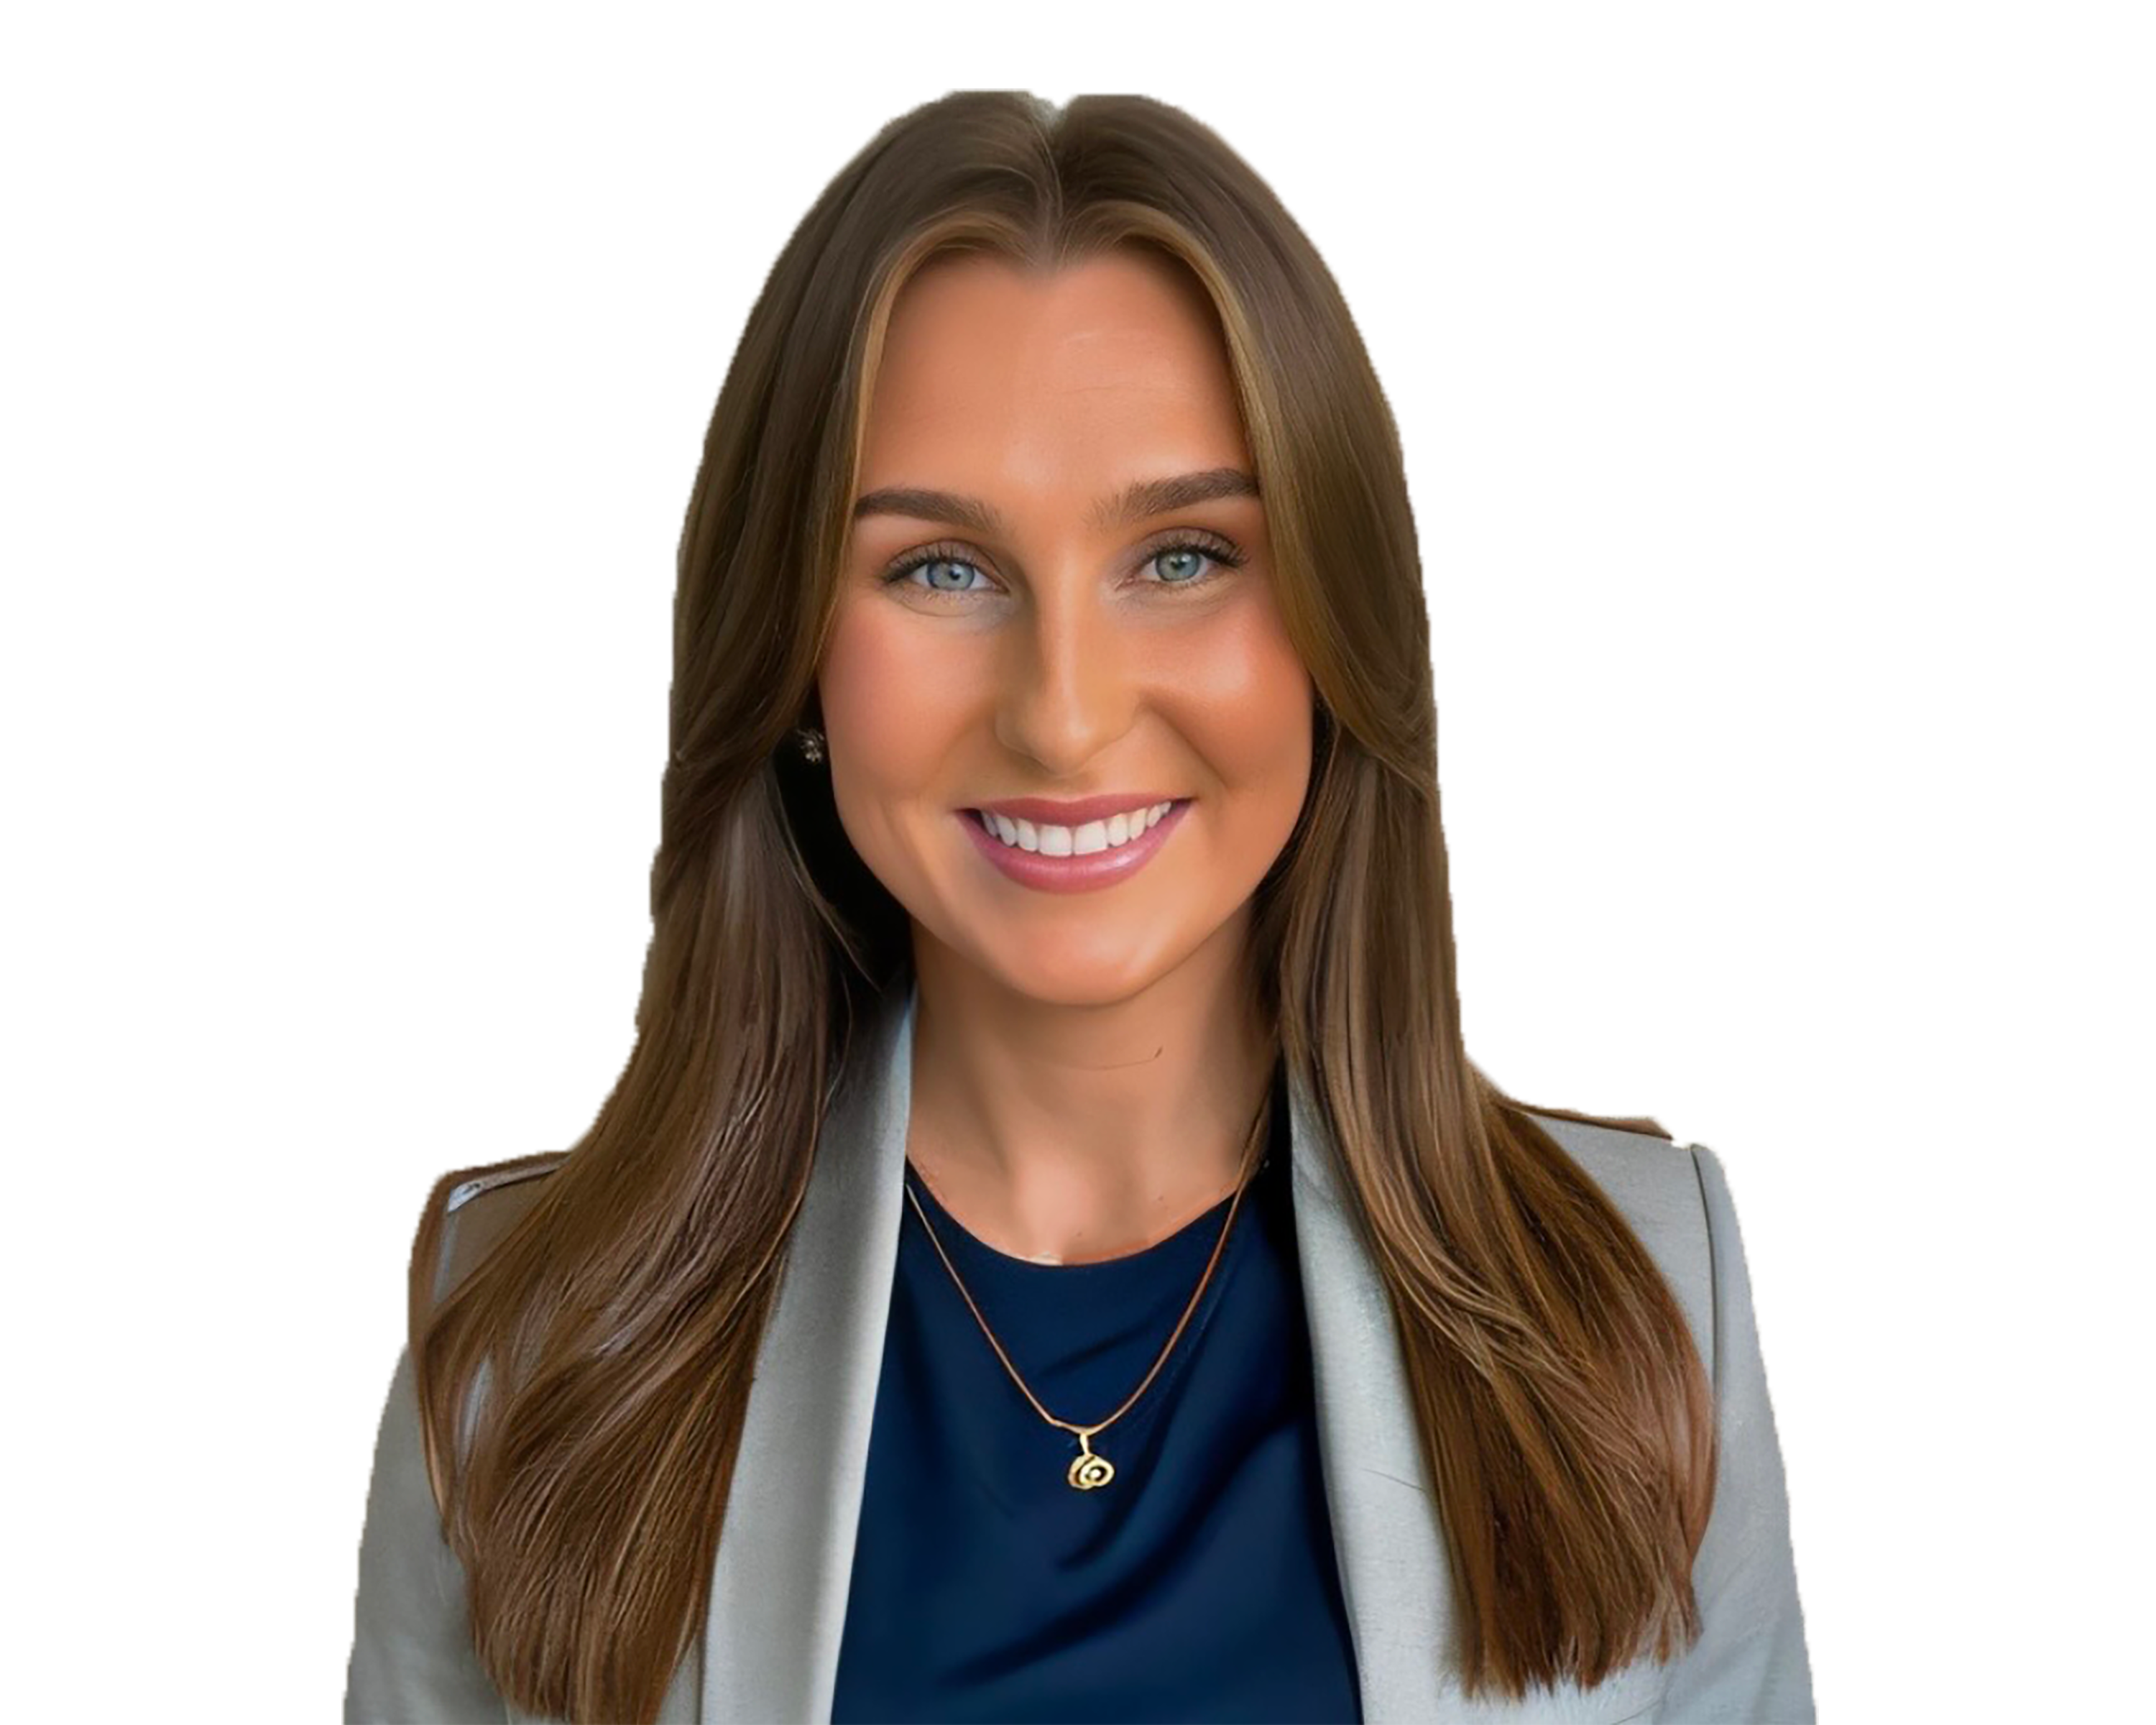 Caitlin Fearon, PA to Kim Simmonds, Law 365